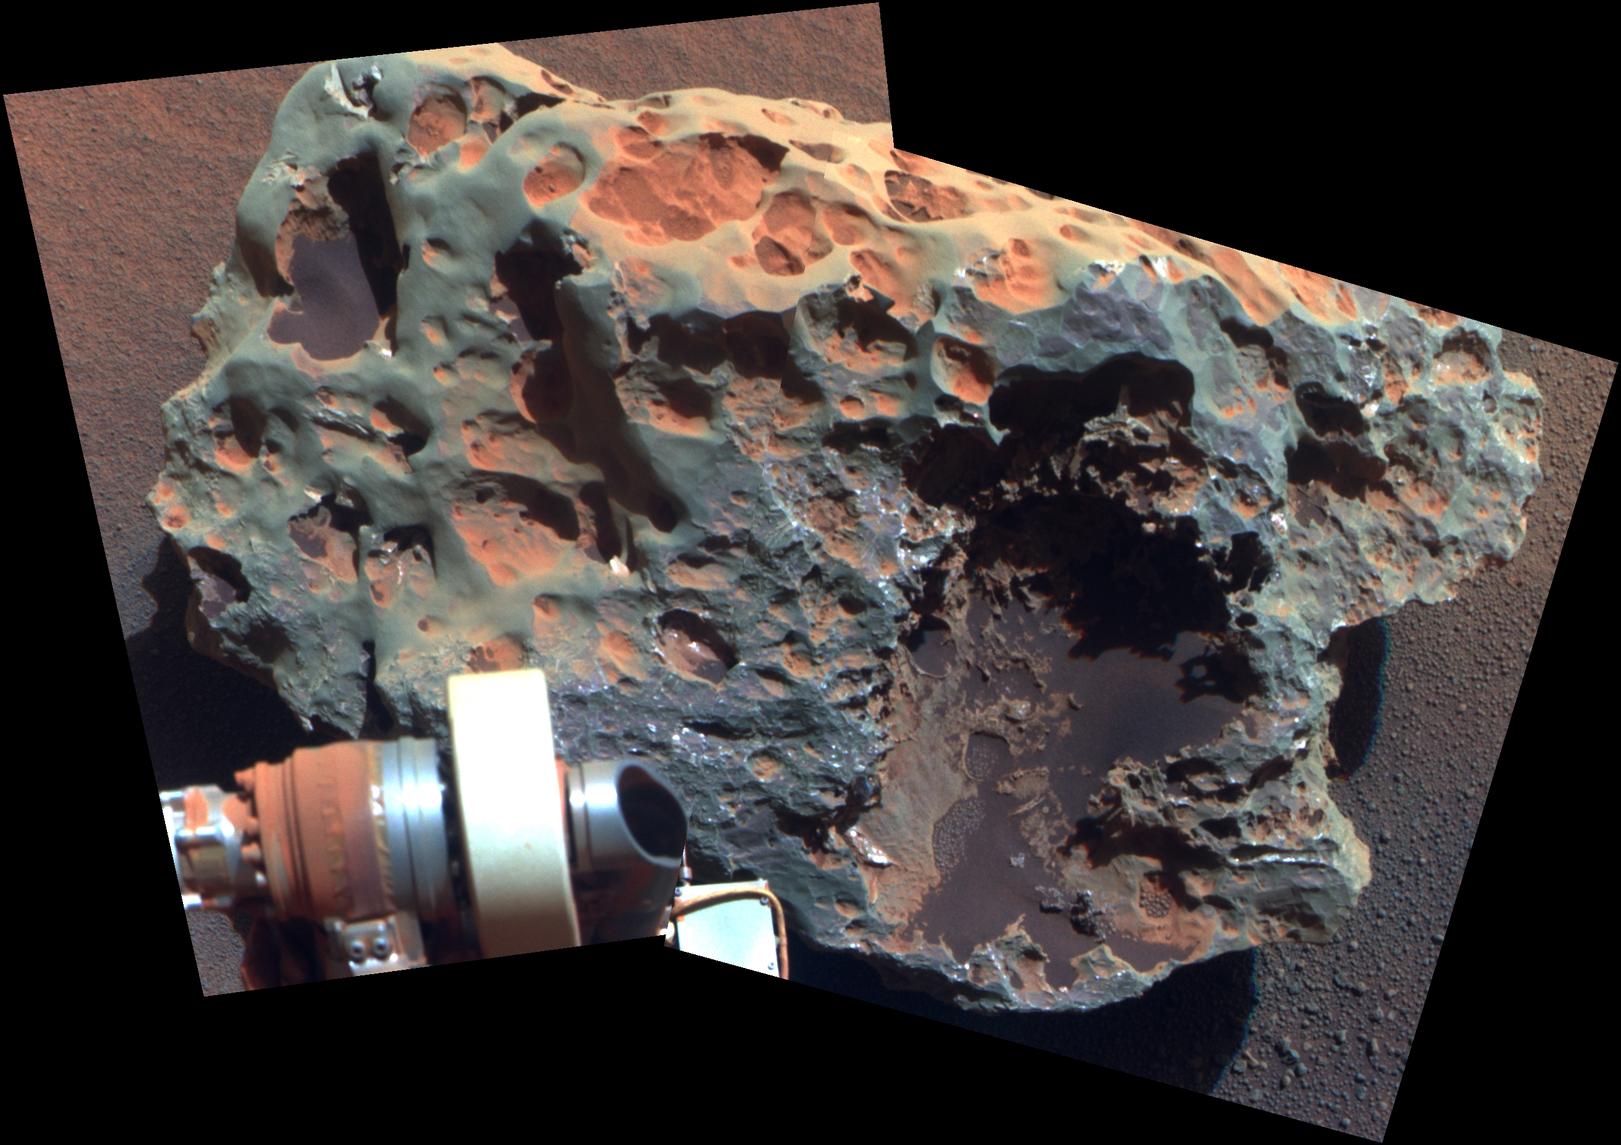 This view of a rock called "Block Island," the largest meteorite yet found on Mars, comes from the panoramic camera (Pancam) on NASA's Mars Exploration Rover Opportunity.